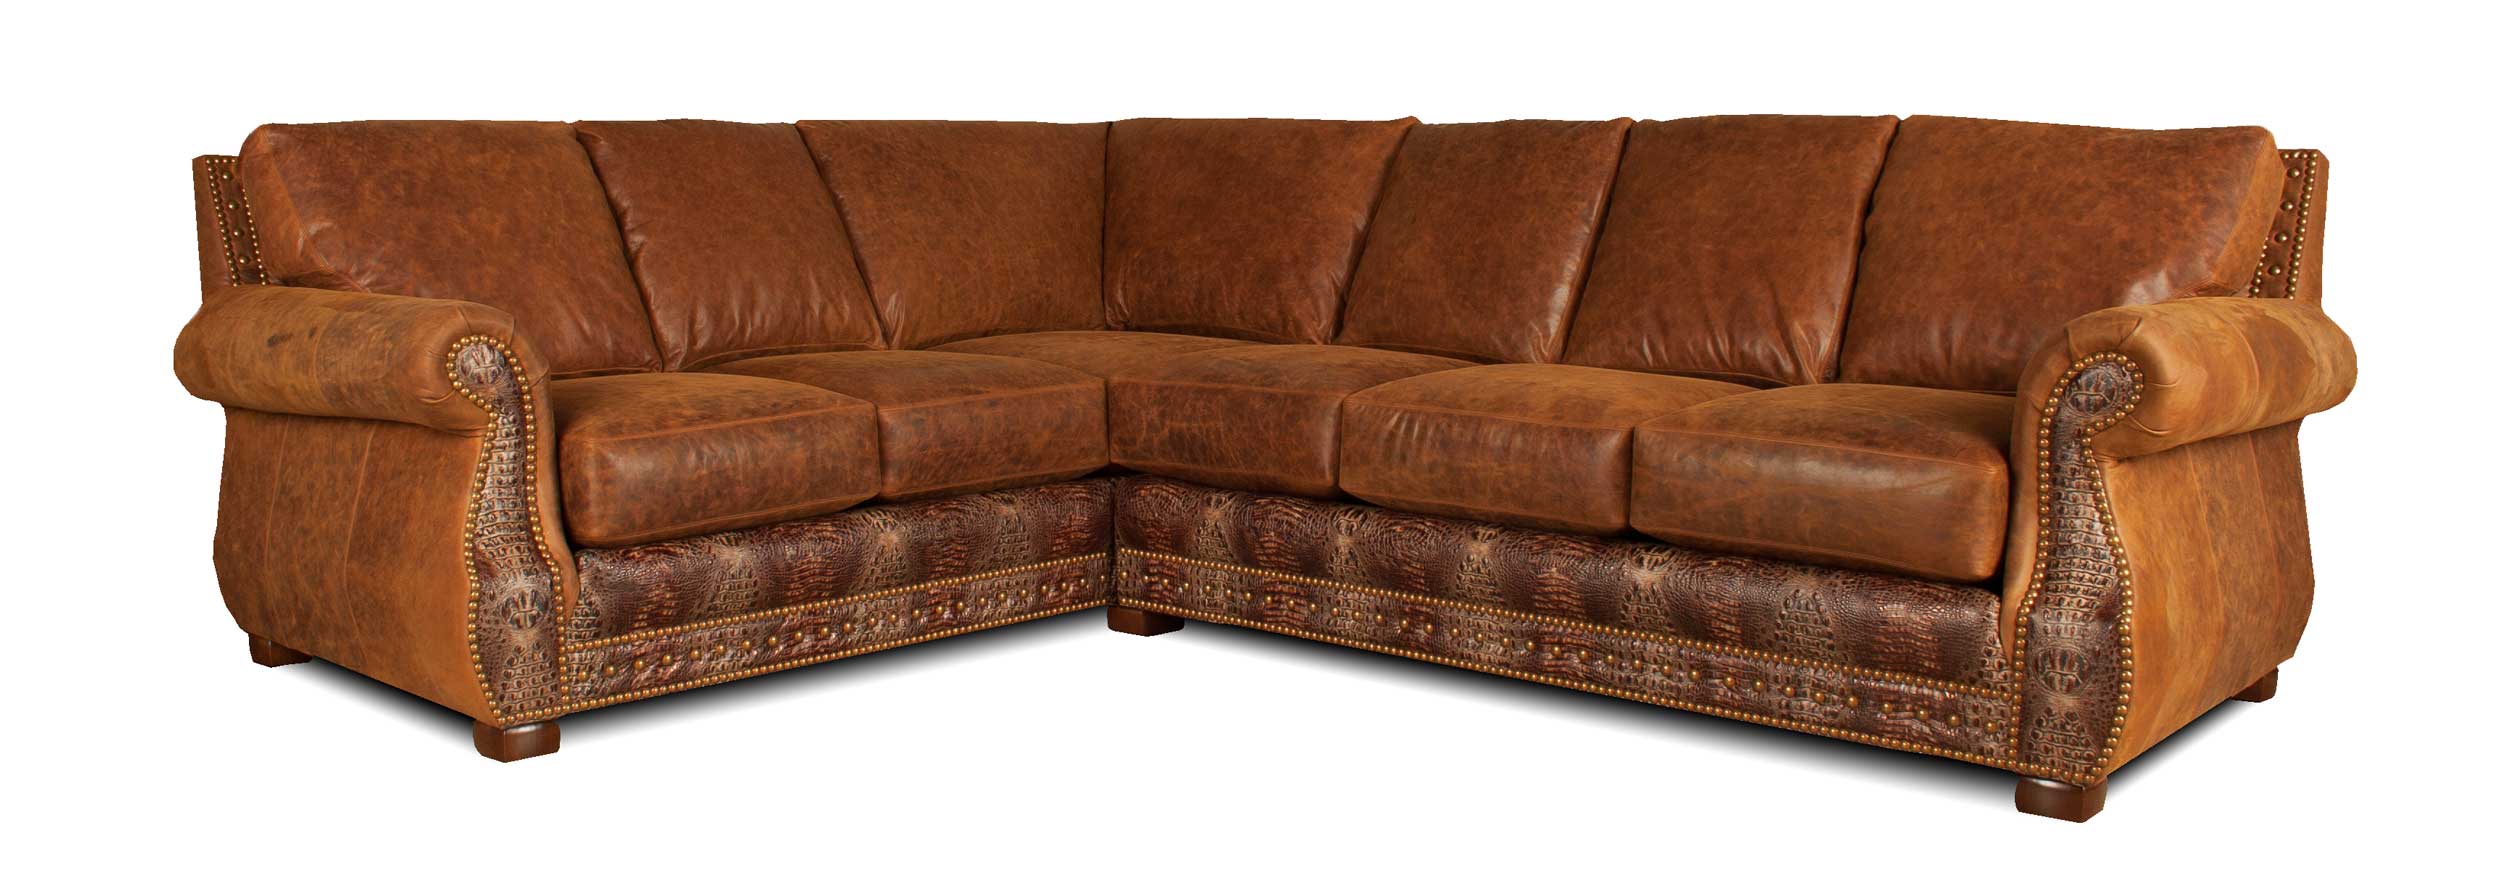 Sun Deep Leather Sectional, Deep Leather Couch